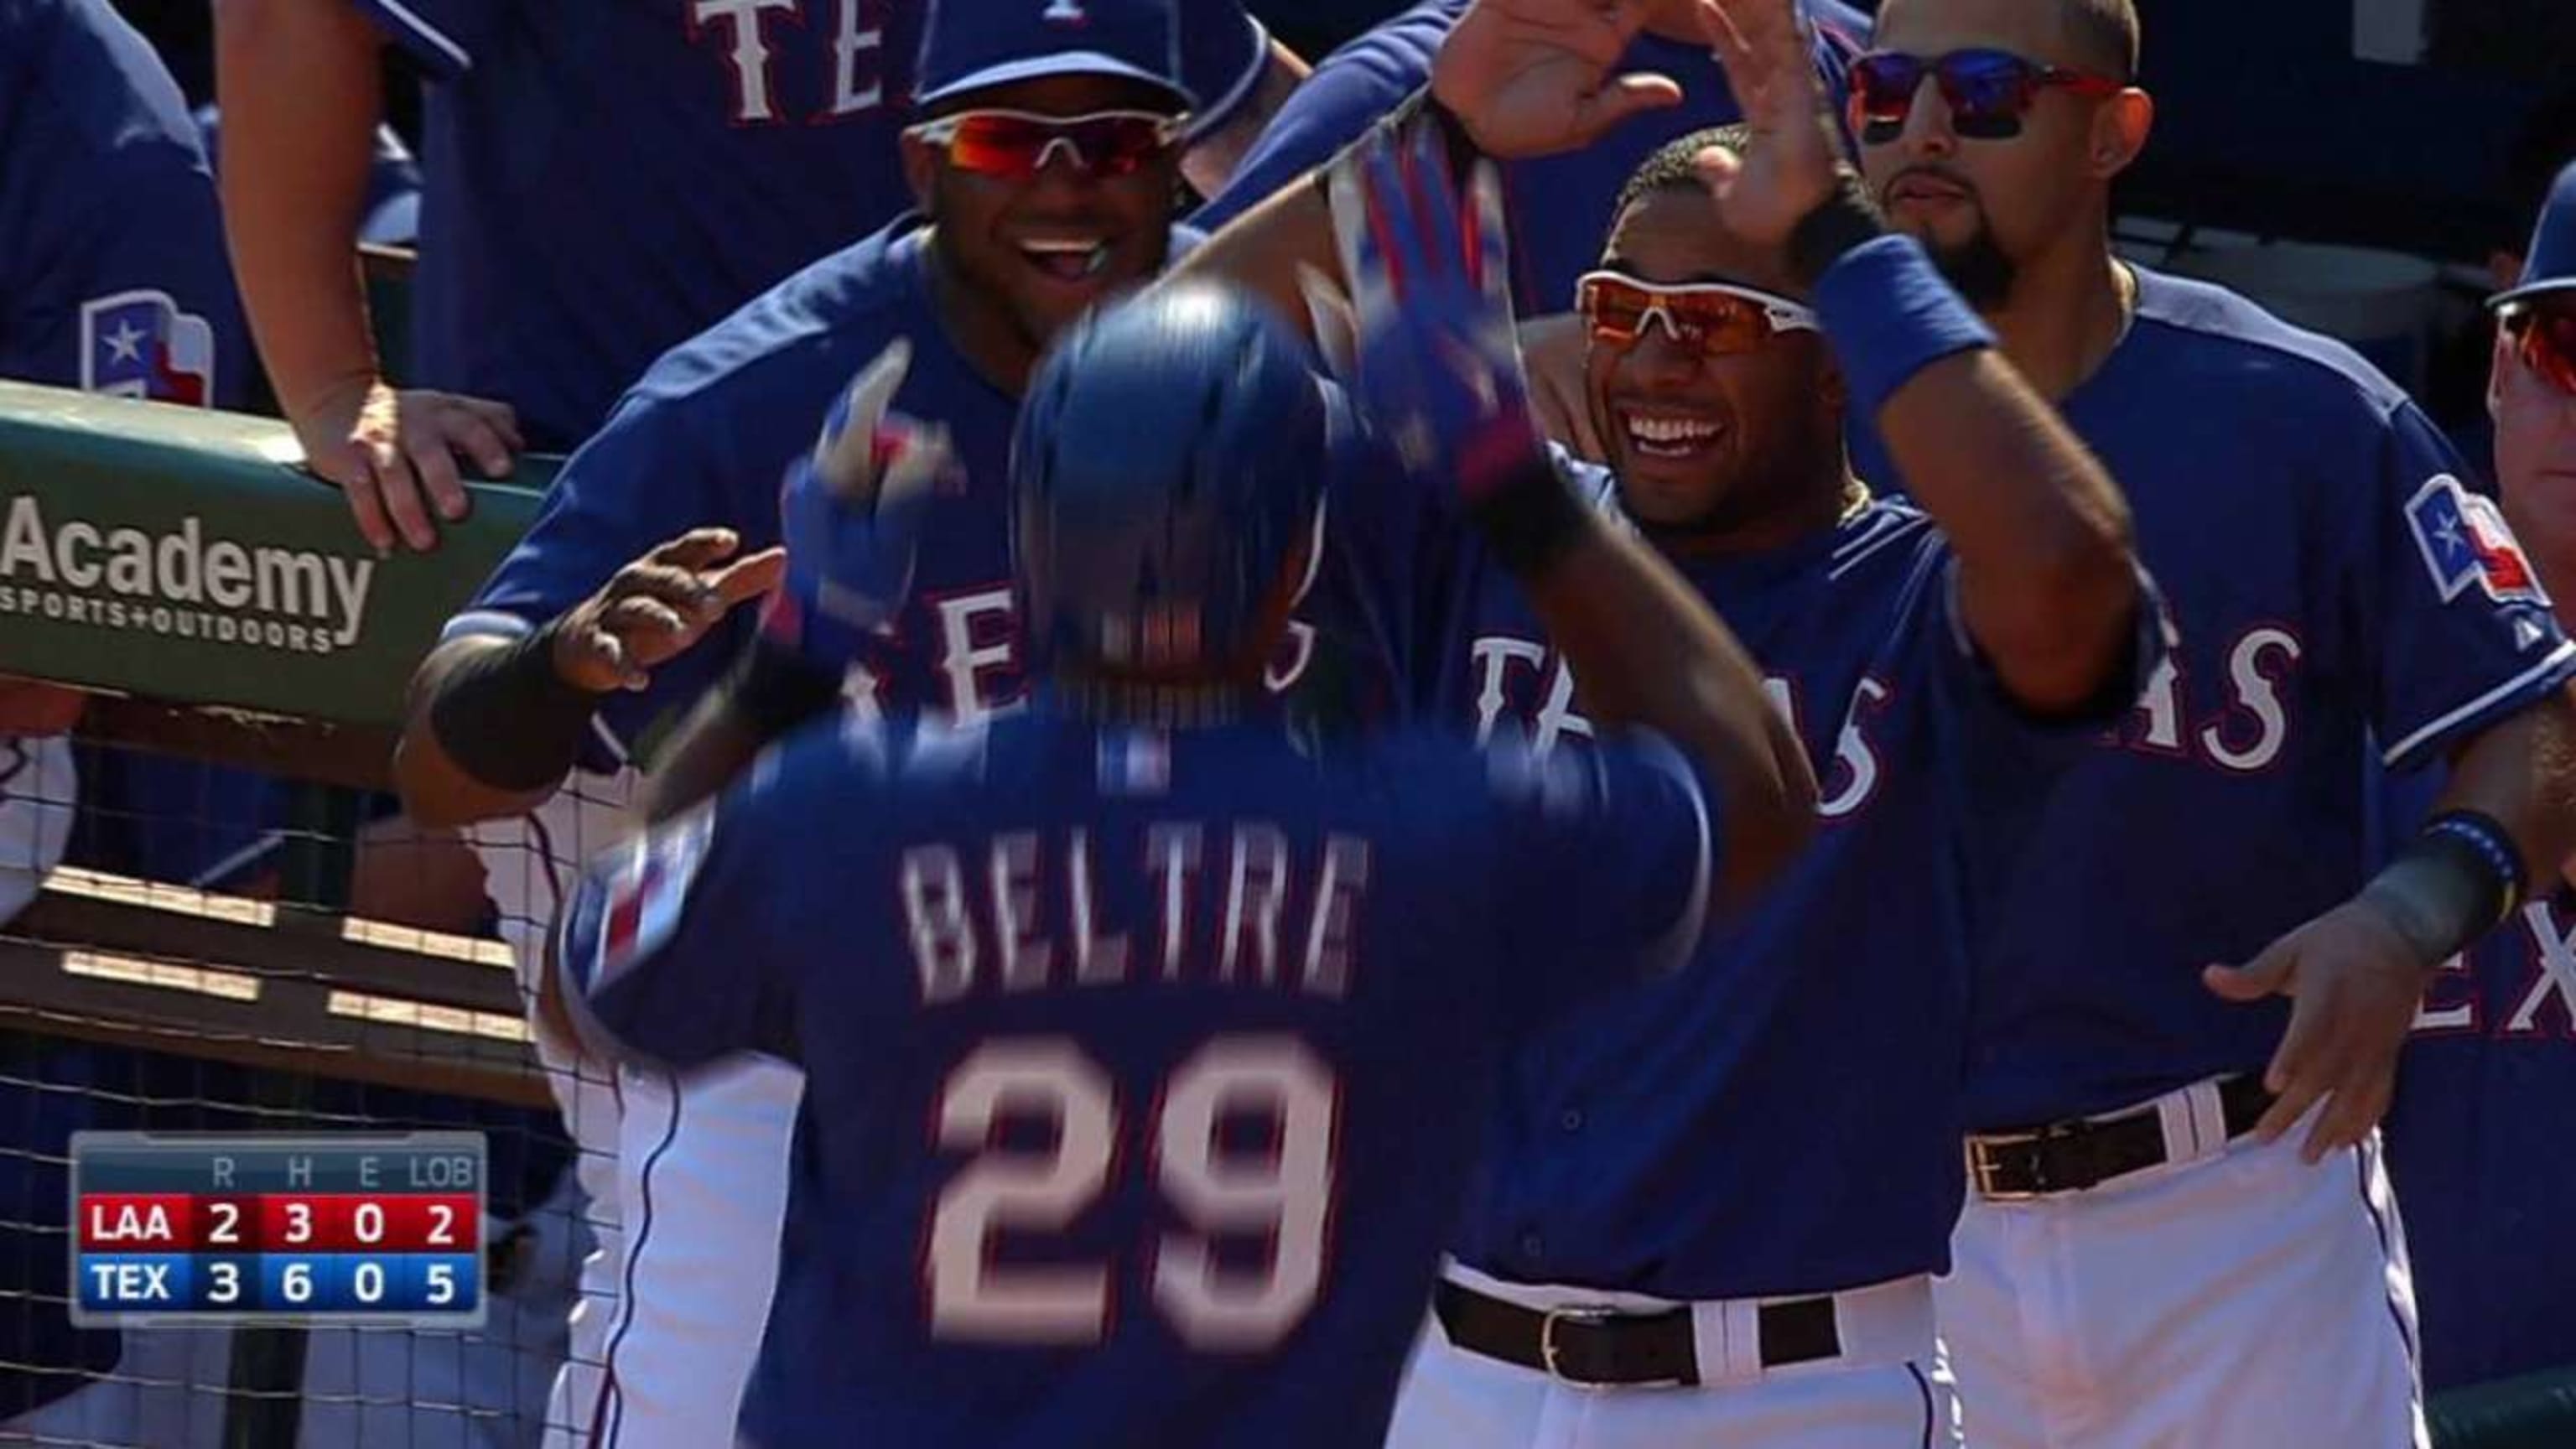 Adrian Beltre shares thoughts on MLB rule changes